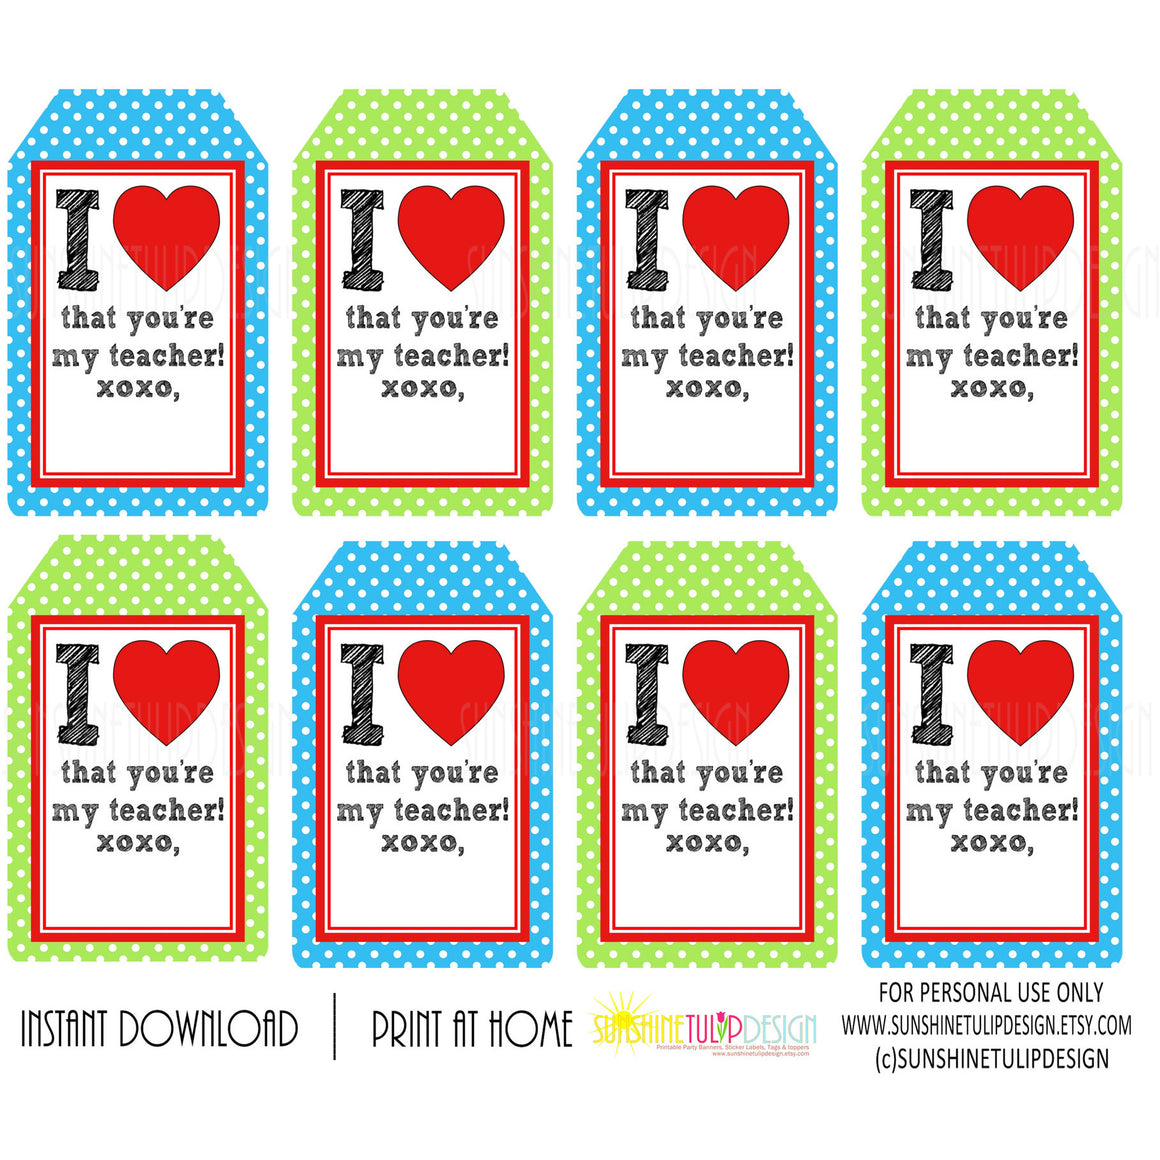 Printable Teacher Appreciation Tags, I Love That You're My Teacher gift tags by SUNSHINETULIPDESIGN - Sunshinetulipdesign